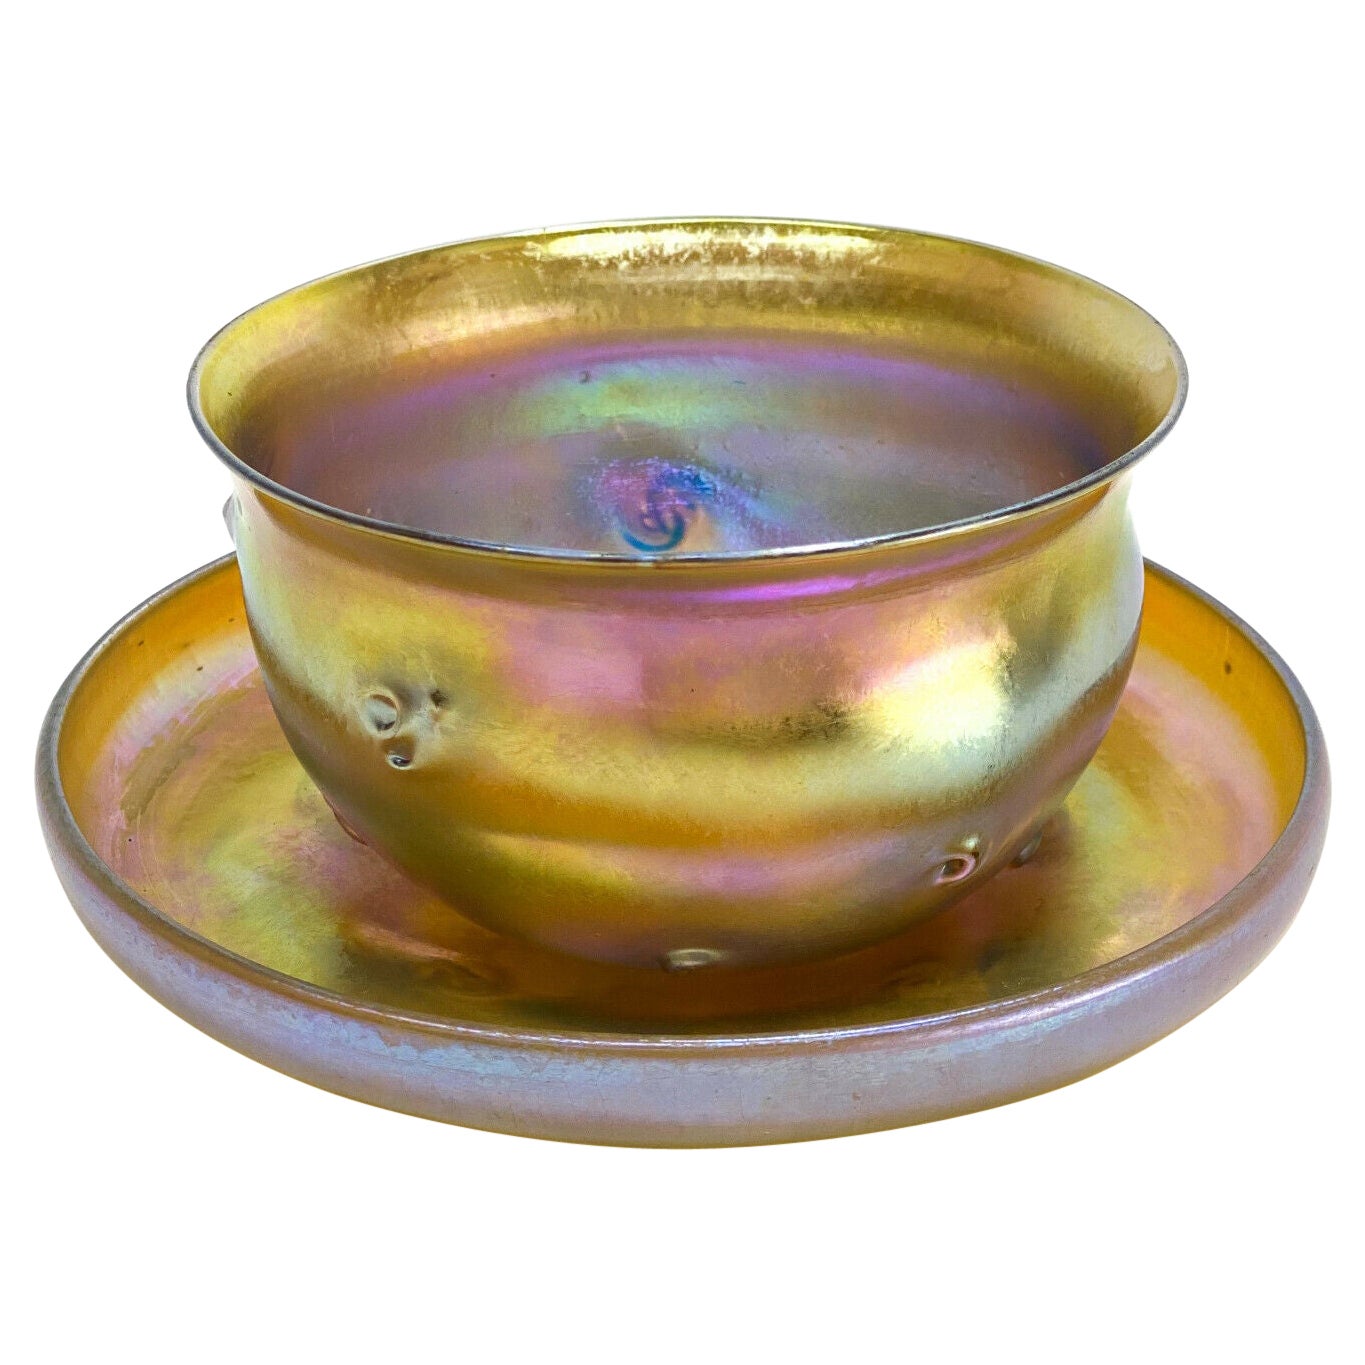 LCT Tiffany Favrile Gold Iridescent Bowl and Underplate, Prunts, circa 1900